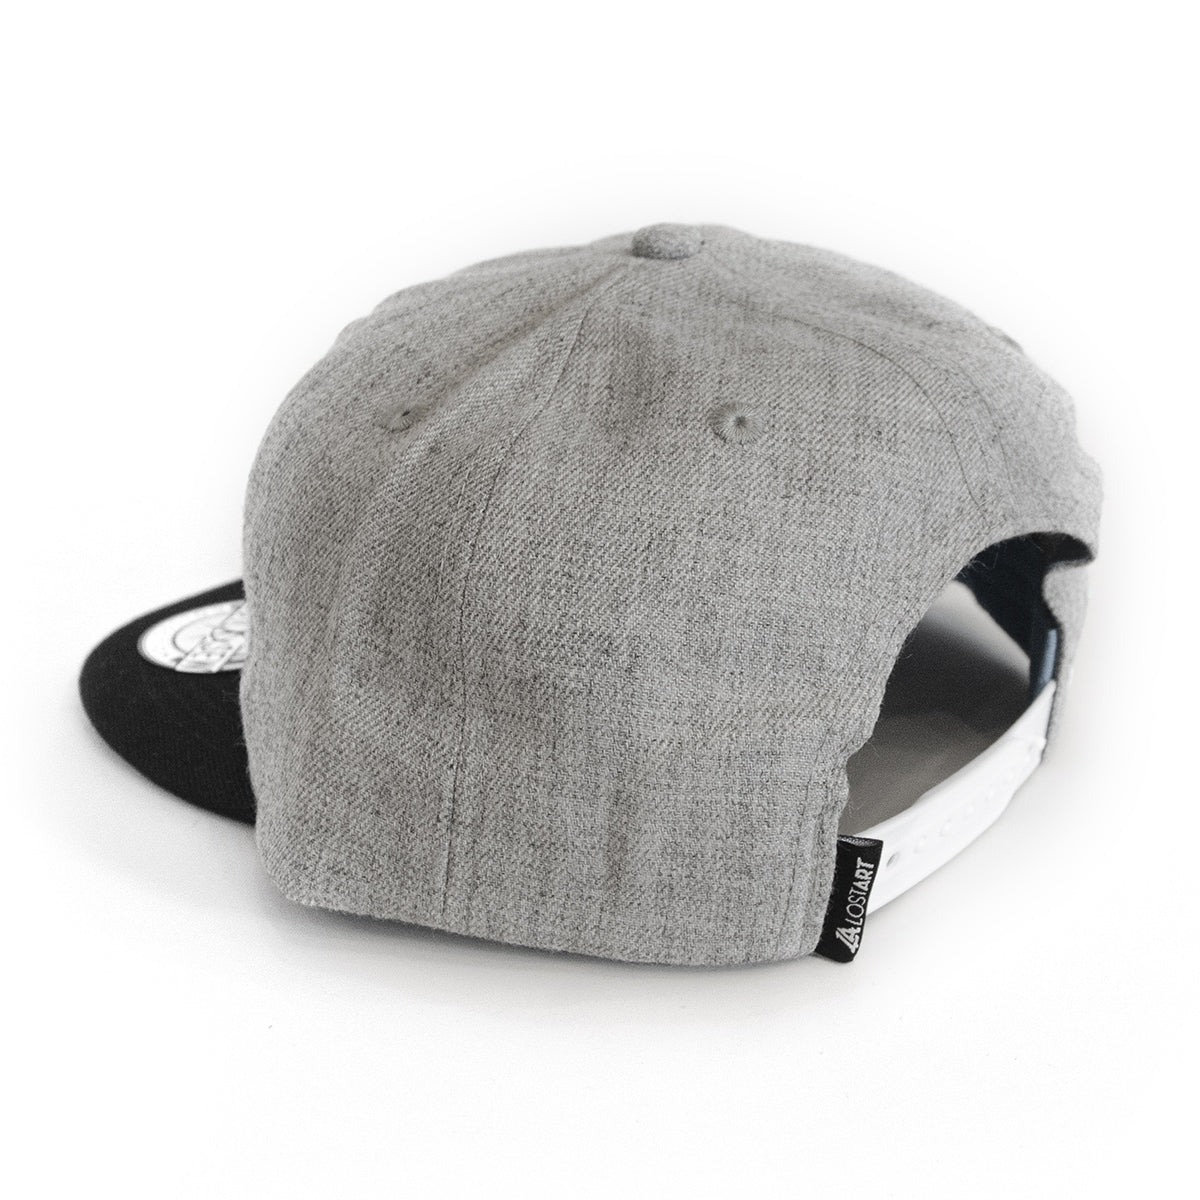 Lost Art Canada - white 807 grey wool mix snapback hat tag view